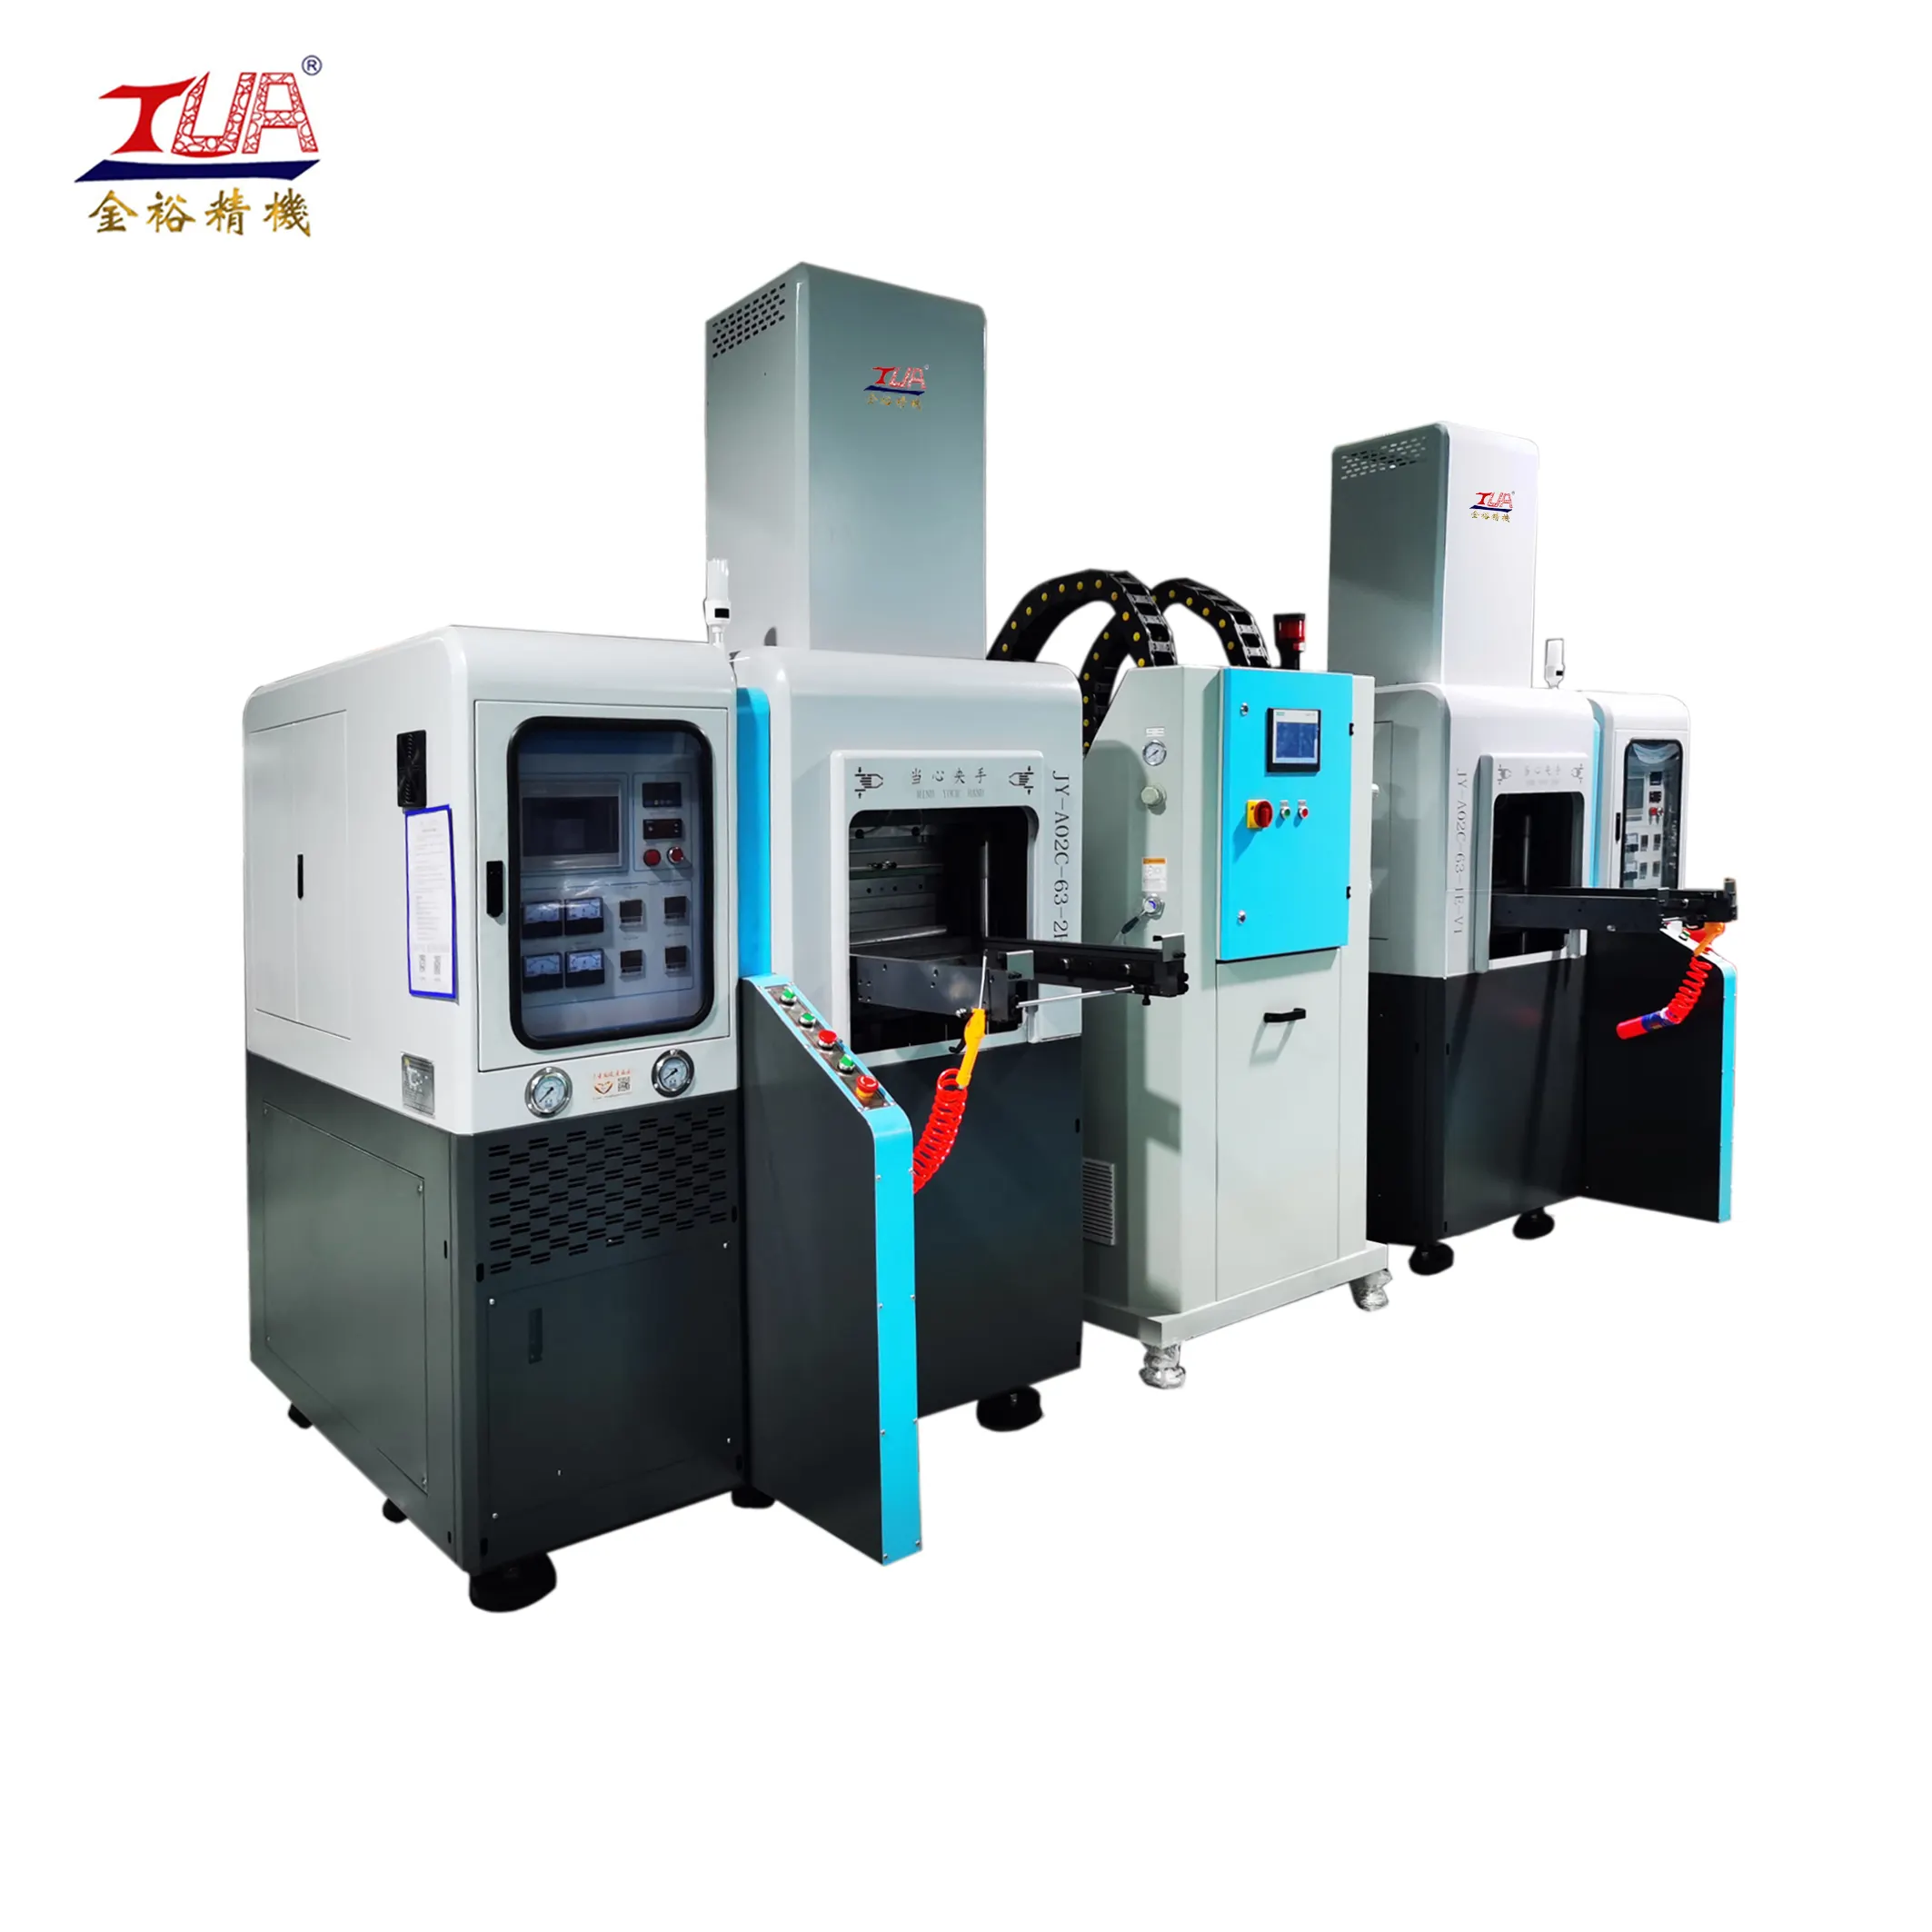 100T Double-headed Liquid Silicone Injection Molding Machine making for Invisible Bra Silicone Key LSR injection